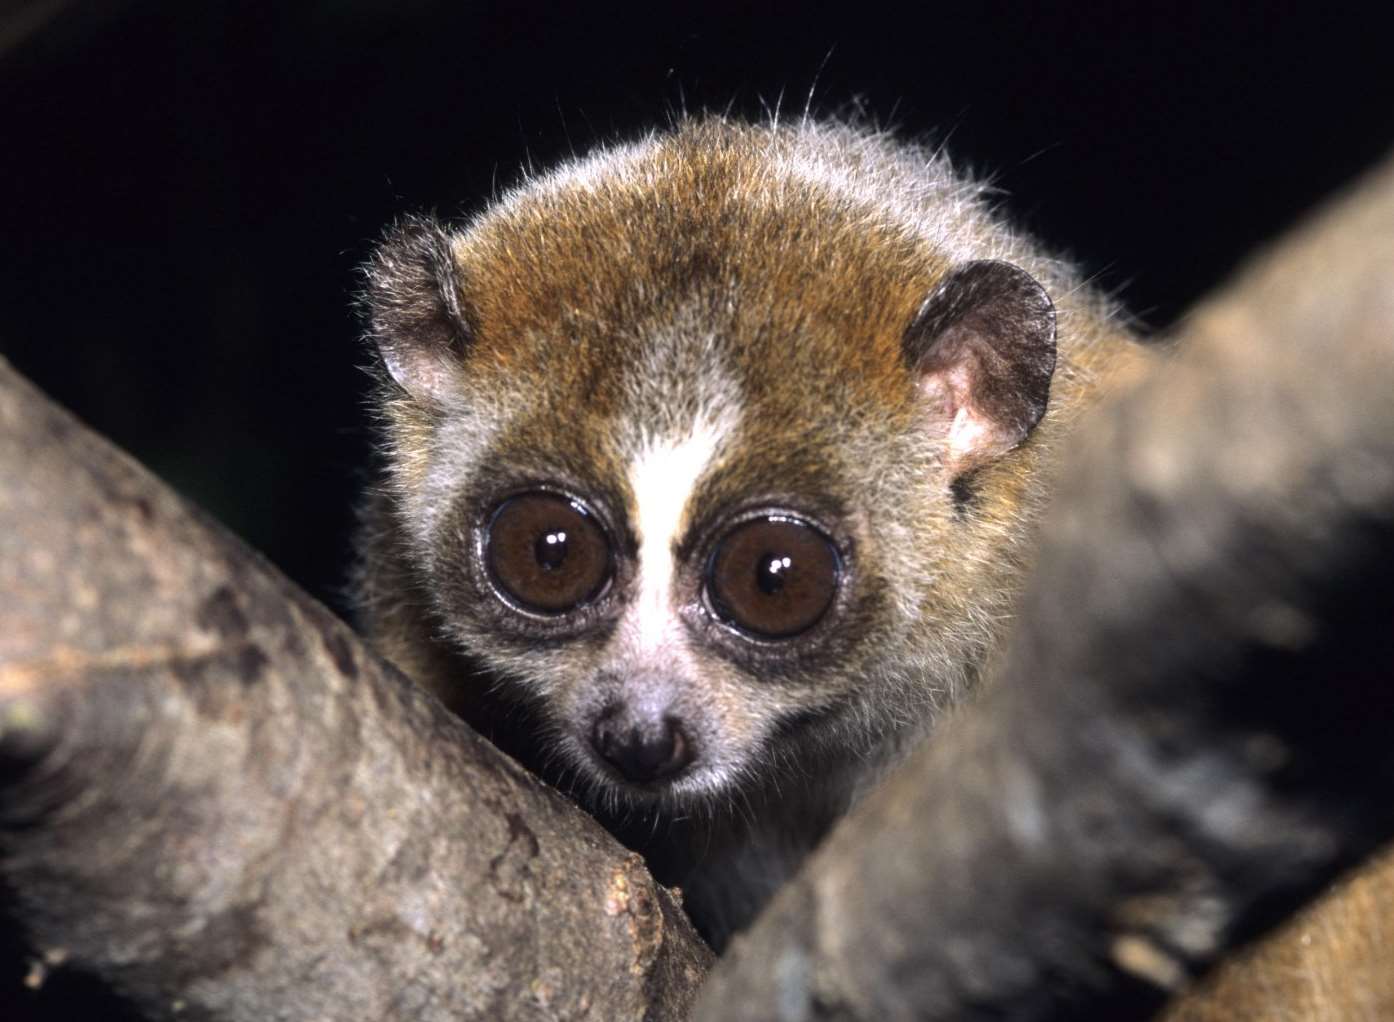 Hemsley Conservation Centre has pygmy slow loris, skunk and other ...